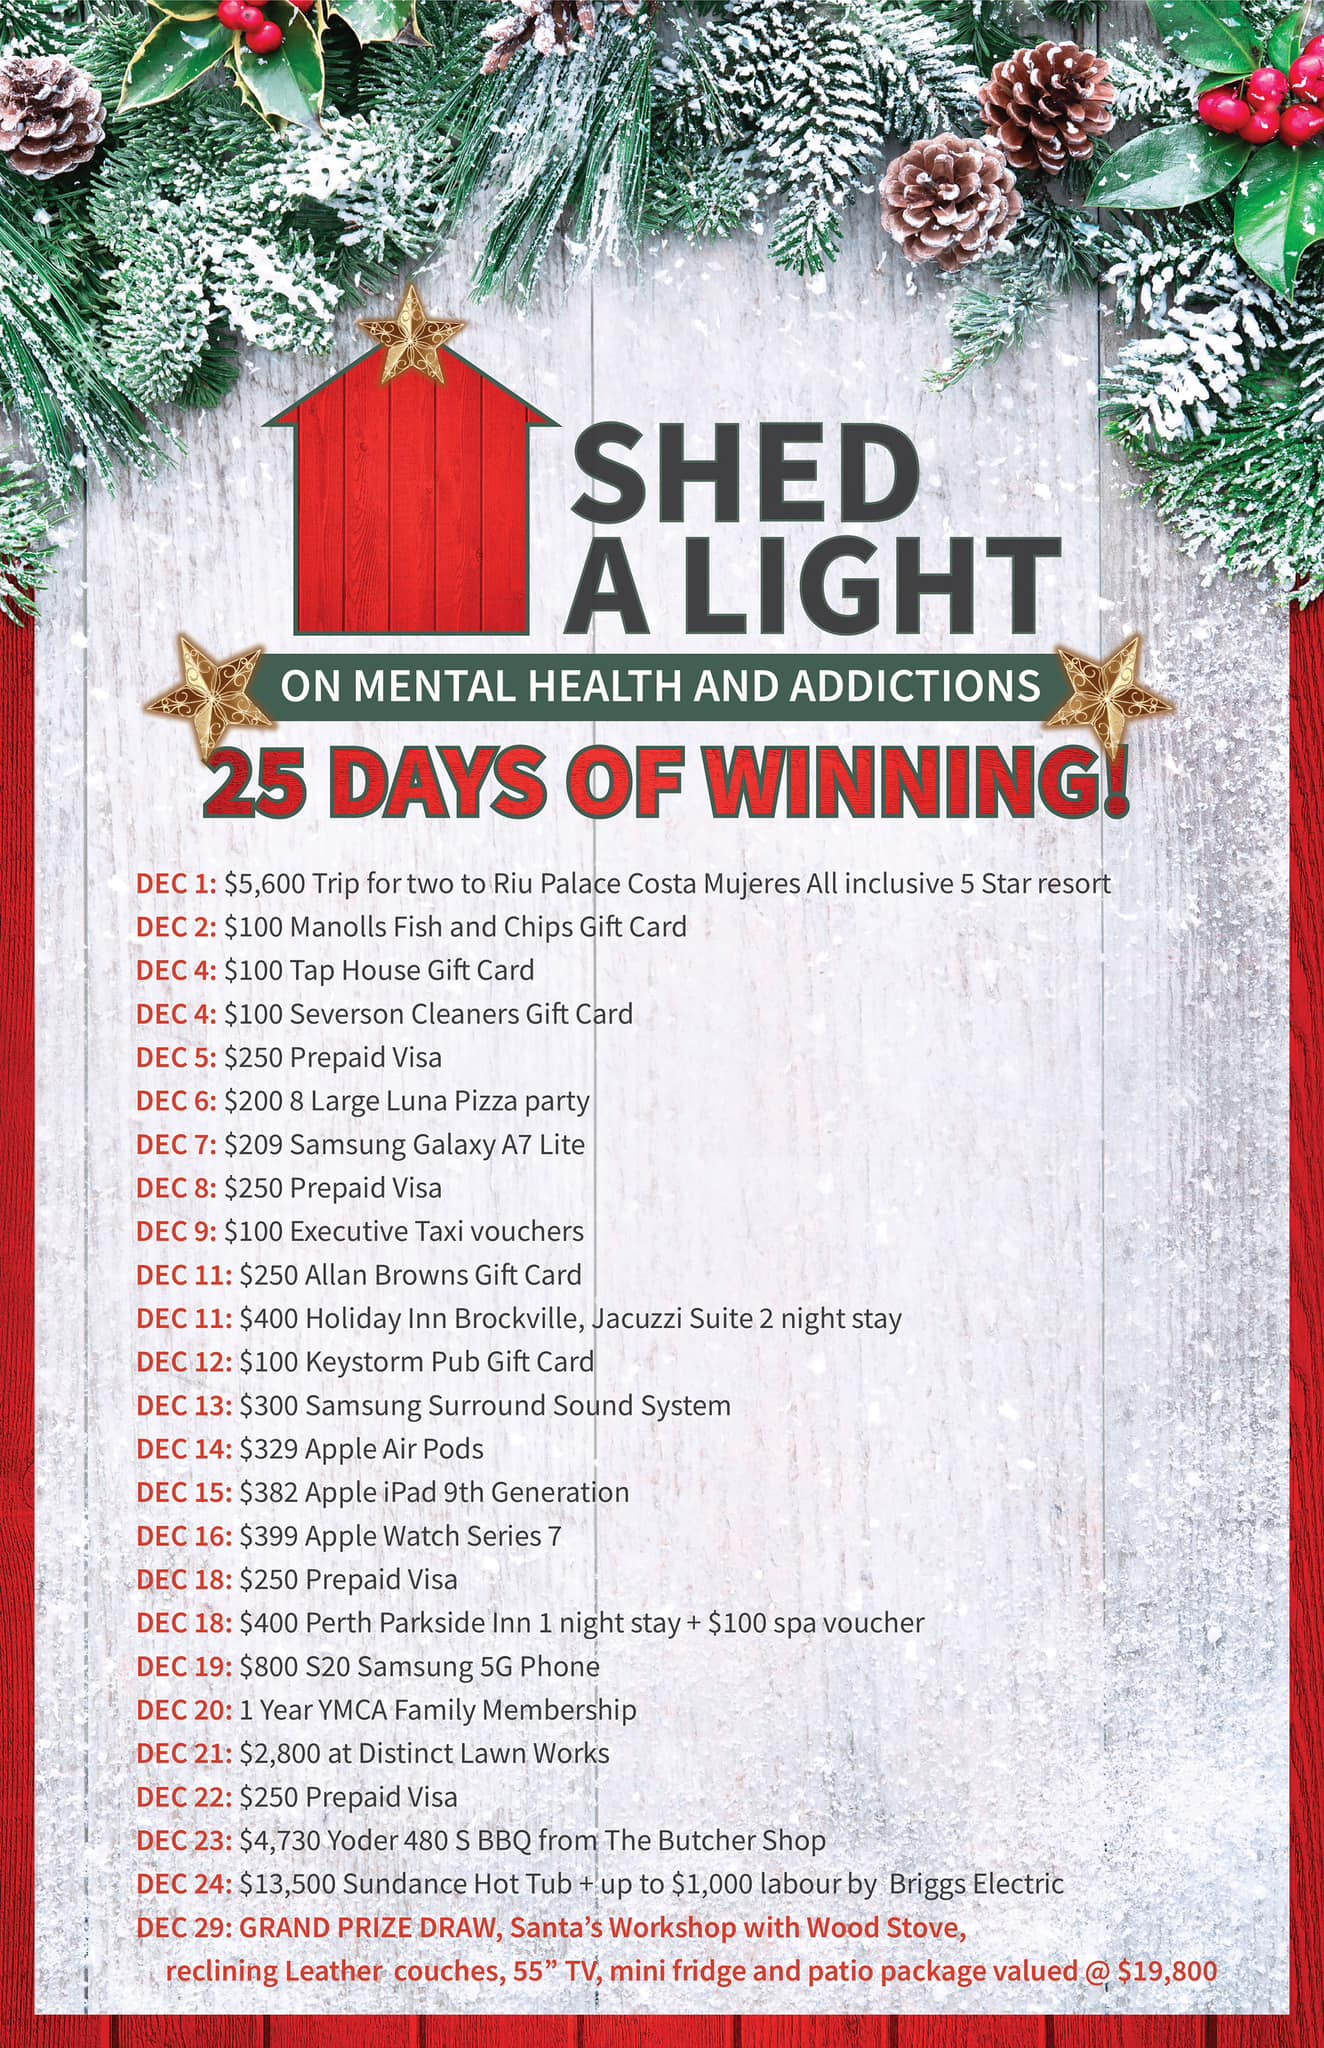 Shed a Light on Mental Health and addictions - Dec 1st winner